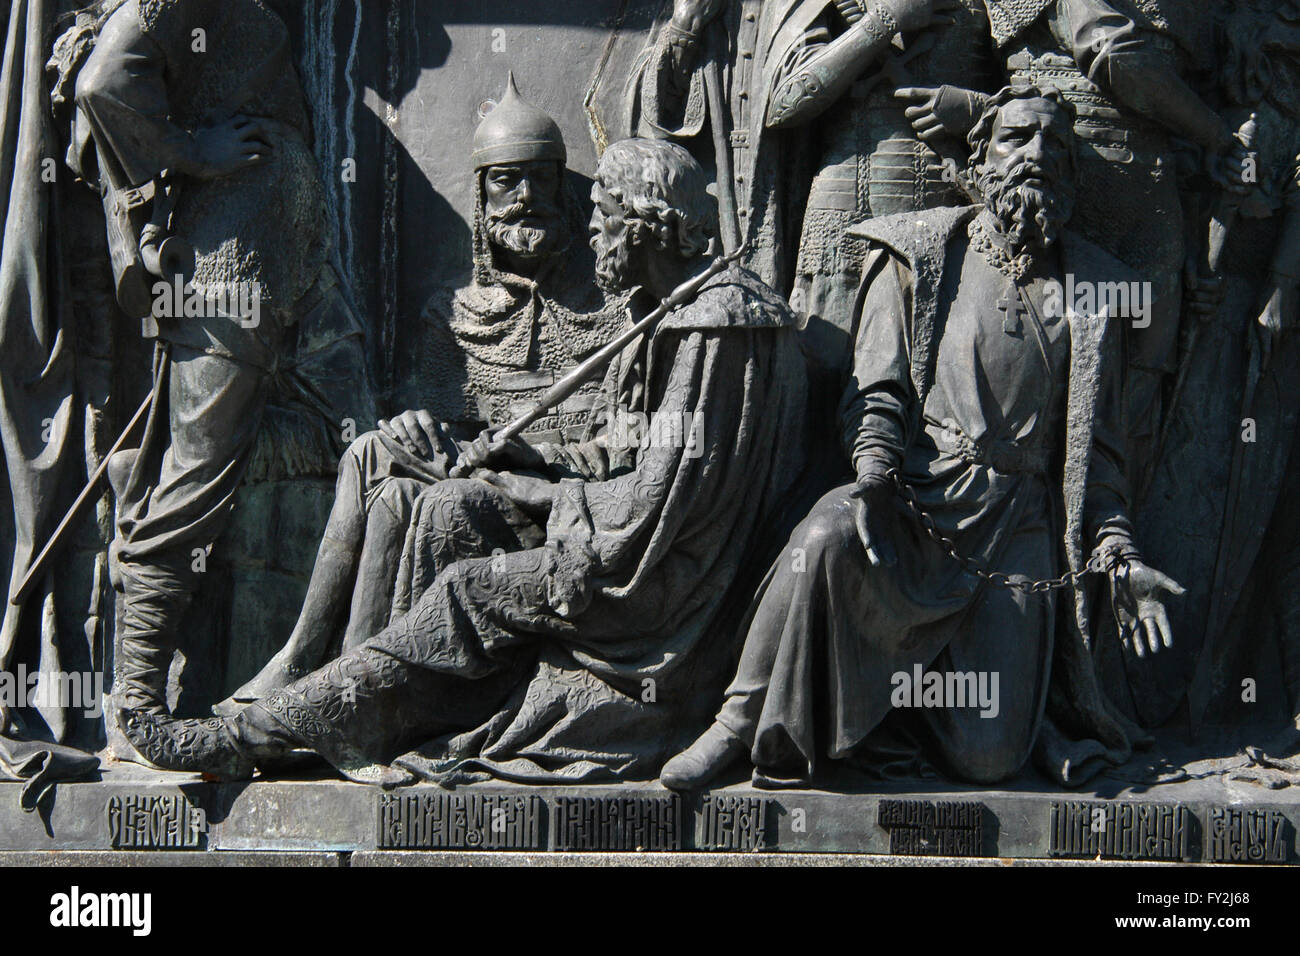 Prince Mstislav Mstislavich the Bold, Prince Daniel of Galicia and Prince Michael of Tver depicted (from left to right) in the bas relief dedicated to Russian military leaders and heroes by Russian sculptors Matvey Chizhov and Alexander Lubimov. Detail of the Monument to the Millennium of Russia (1862) designed by Mikhail Mikeshin in Veliky Novgorod, Russia. Stock Photo